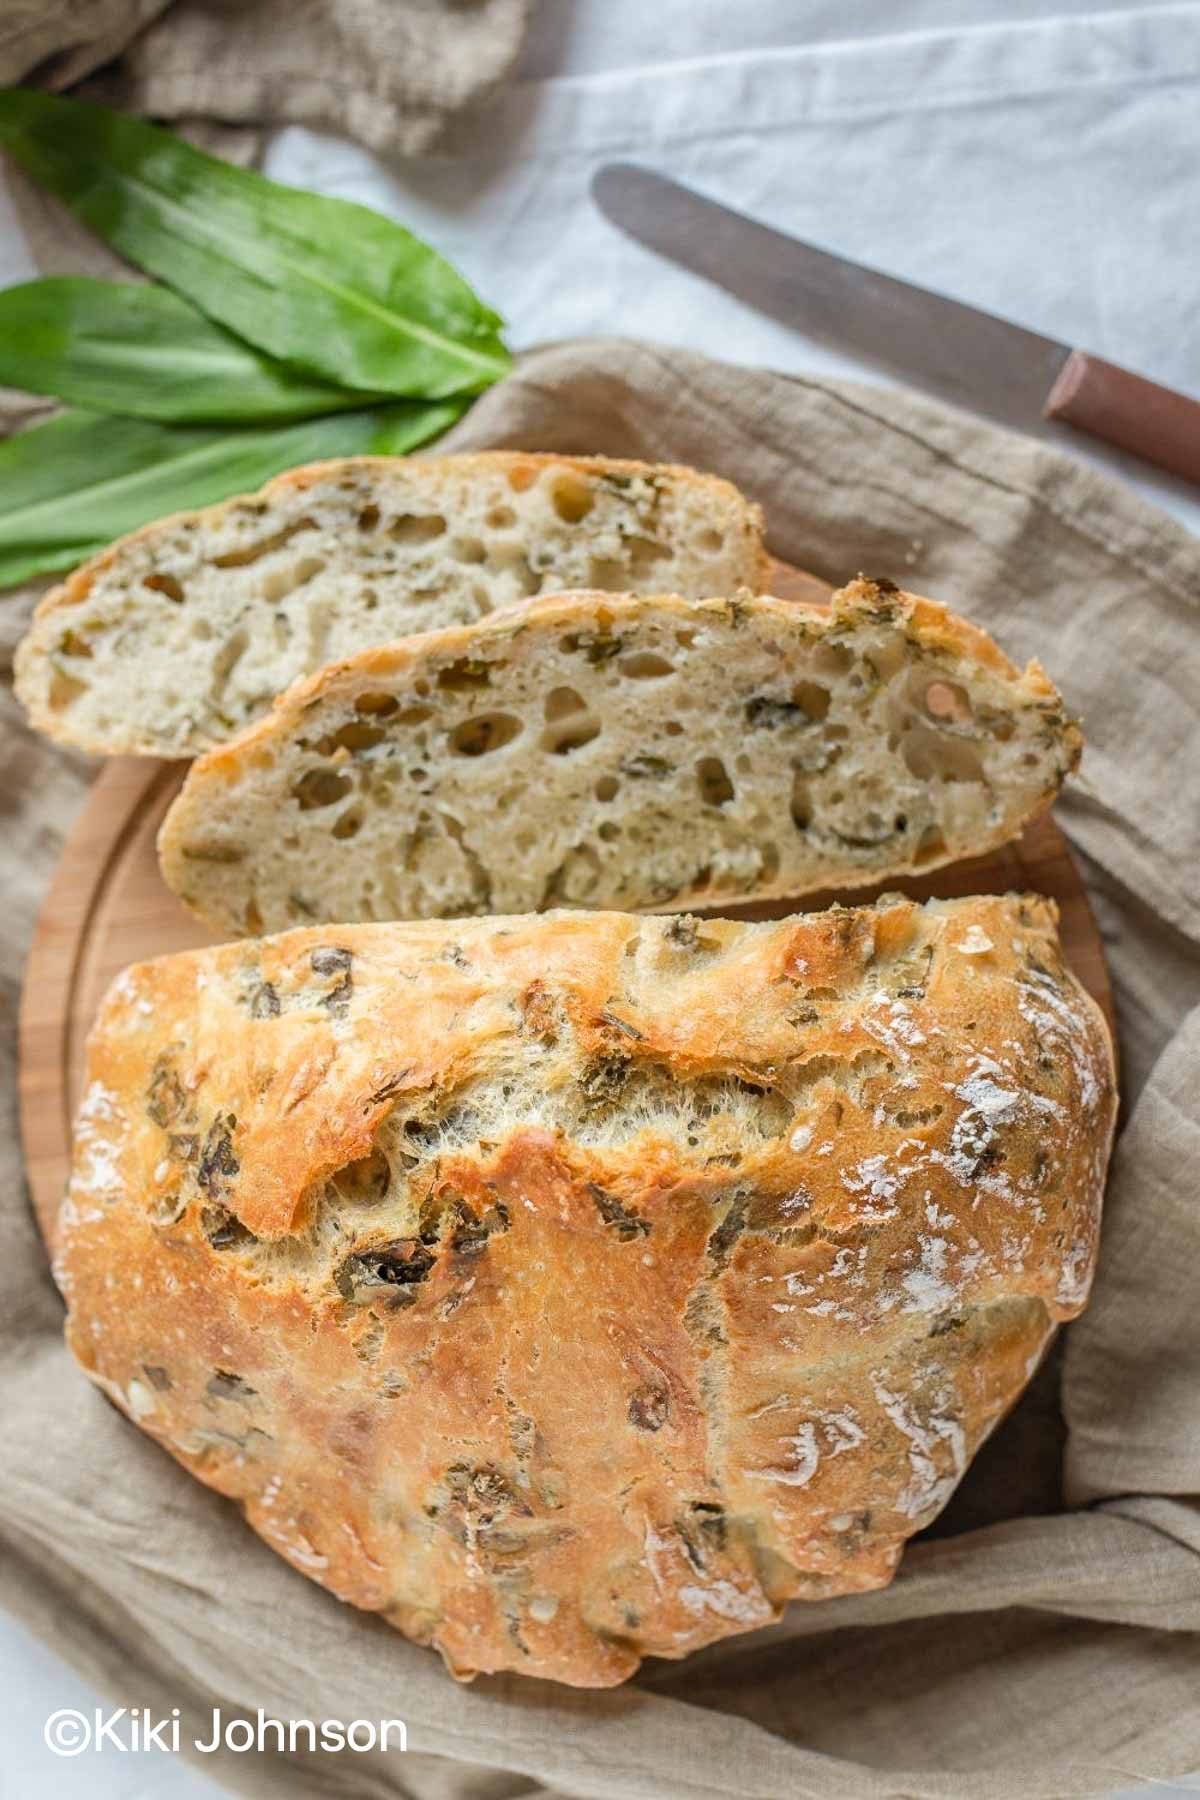 German no knead white garlic bread with wild garlic leaves on the side